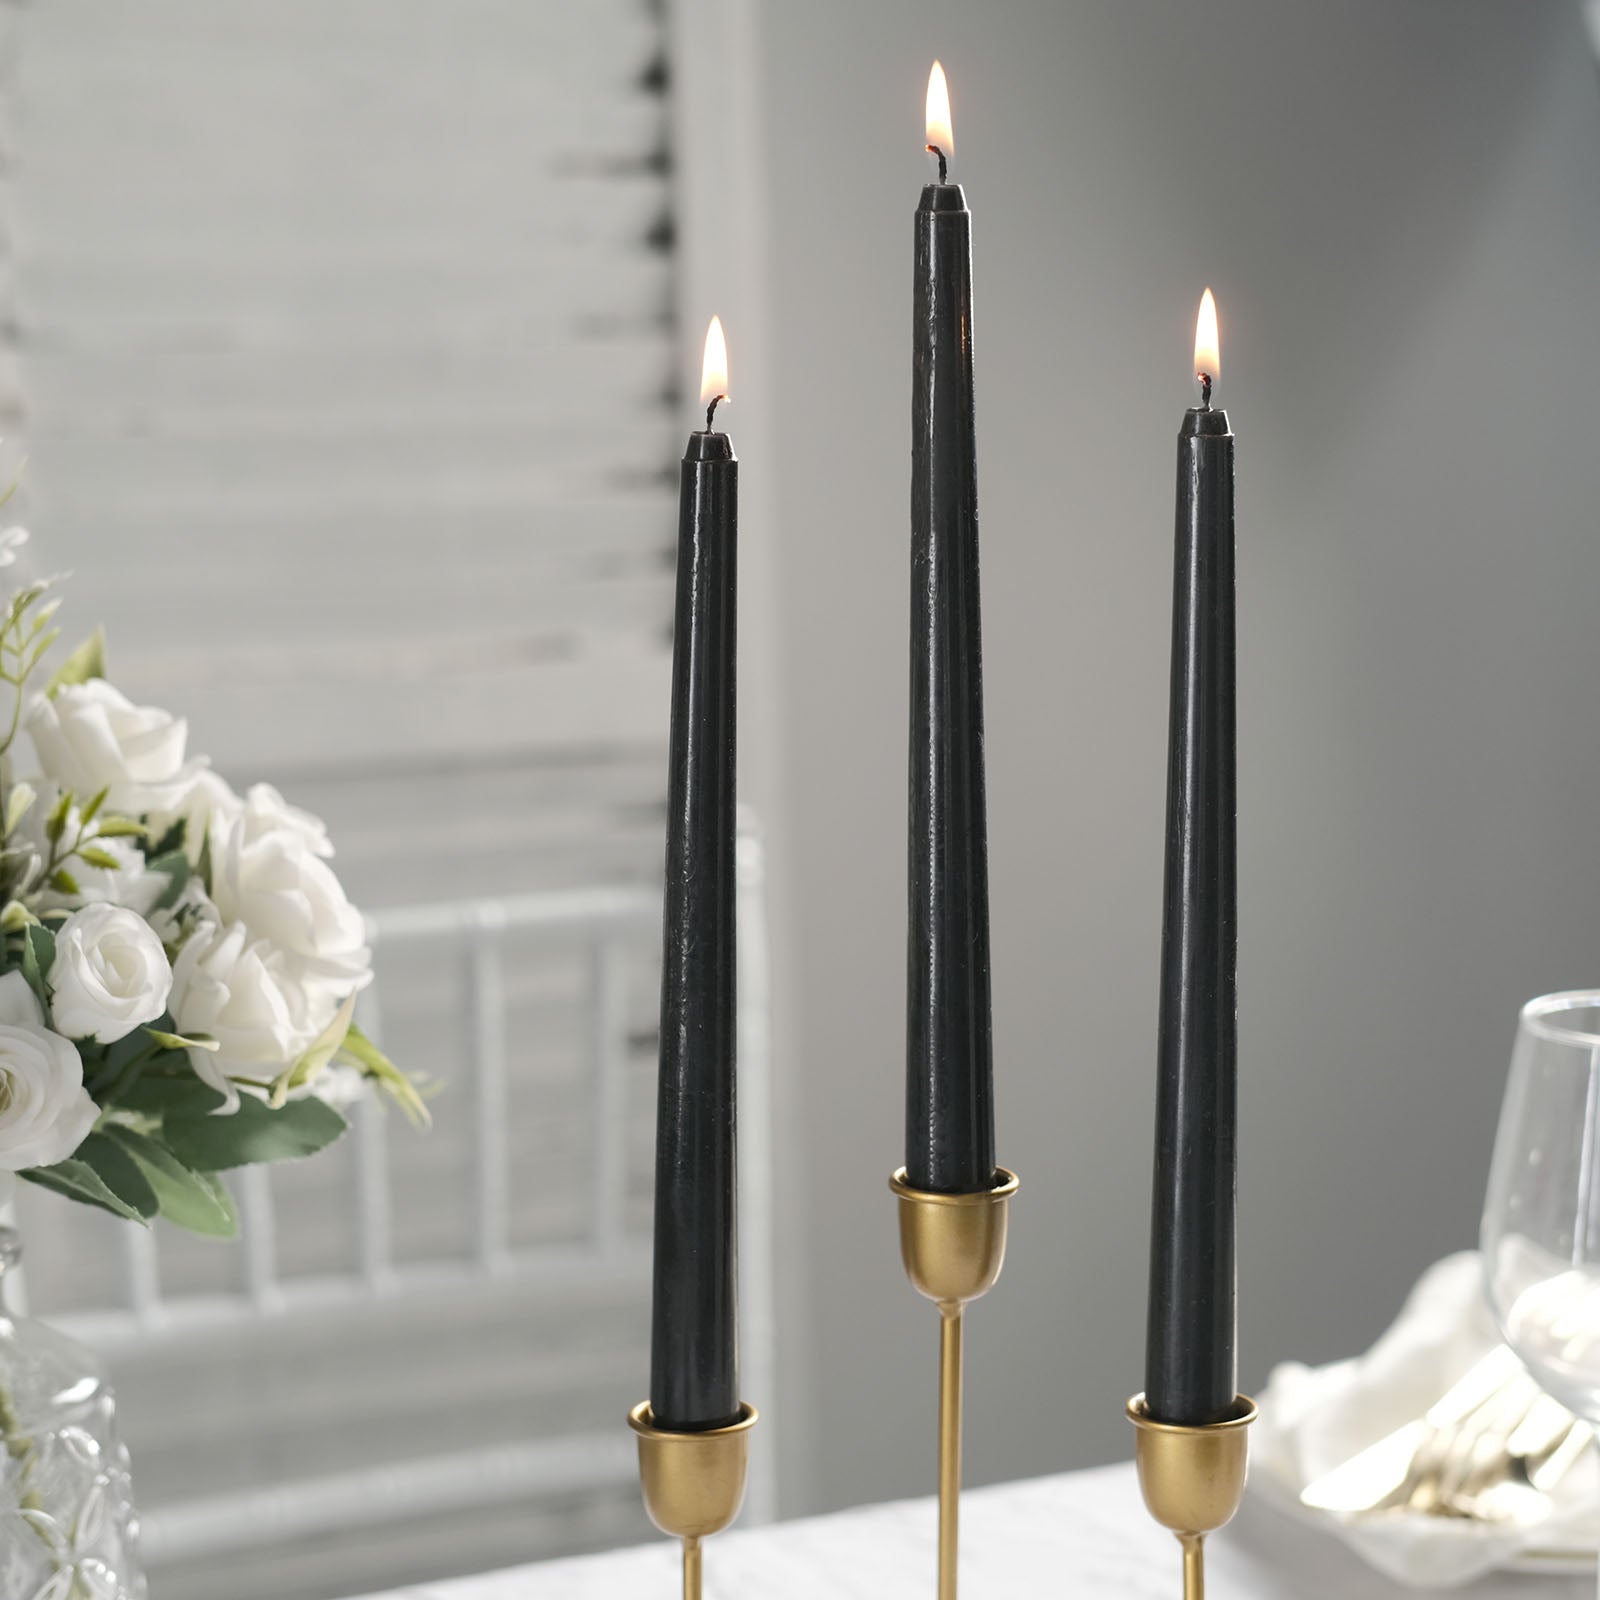 BLACK 12 Spiral 11 Long Unscented Premium Wax Taper CANDLES Party  Decorations